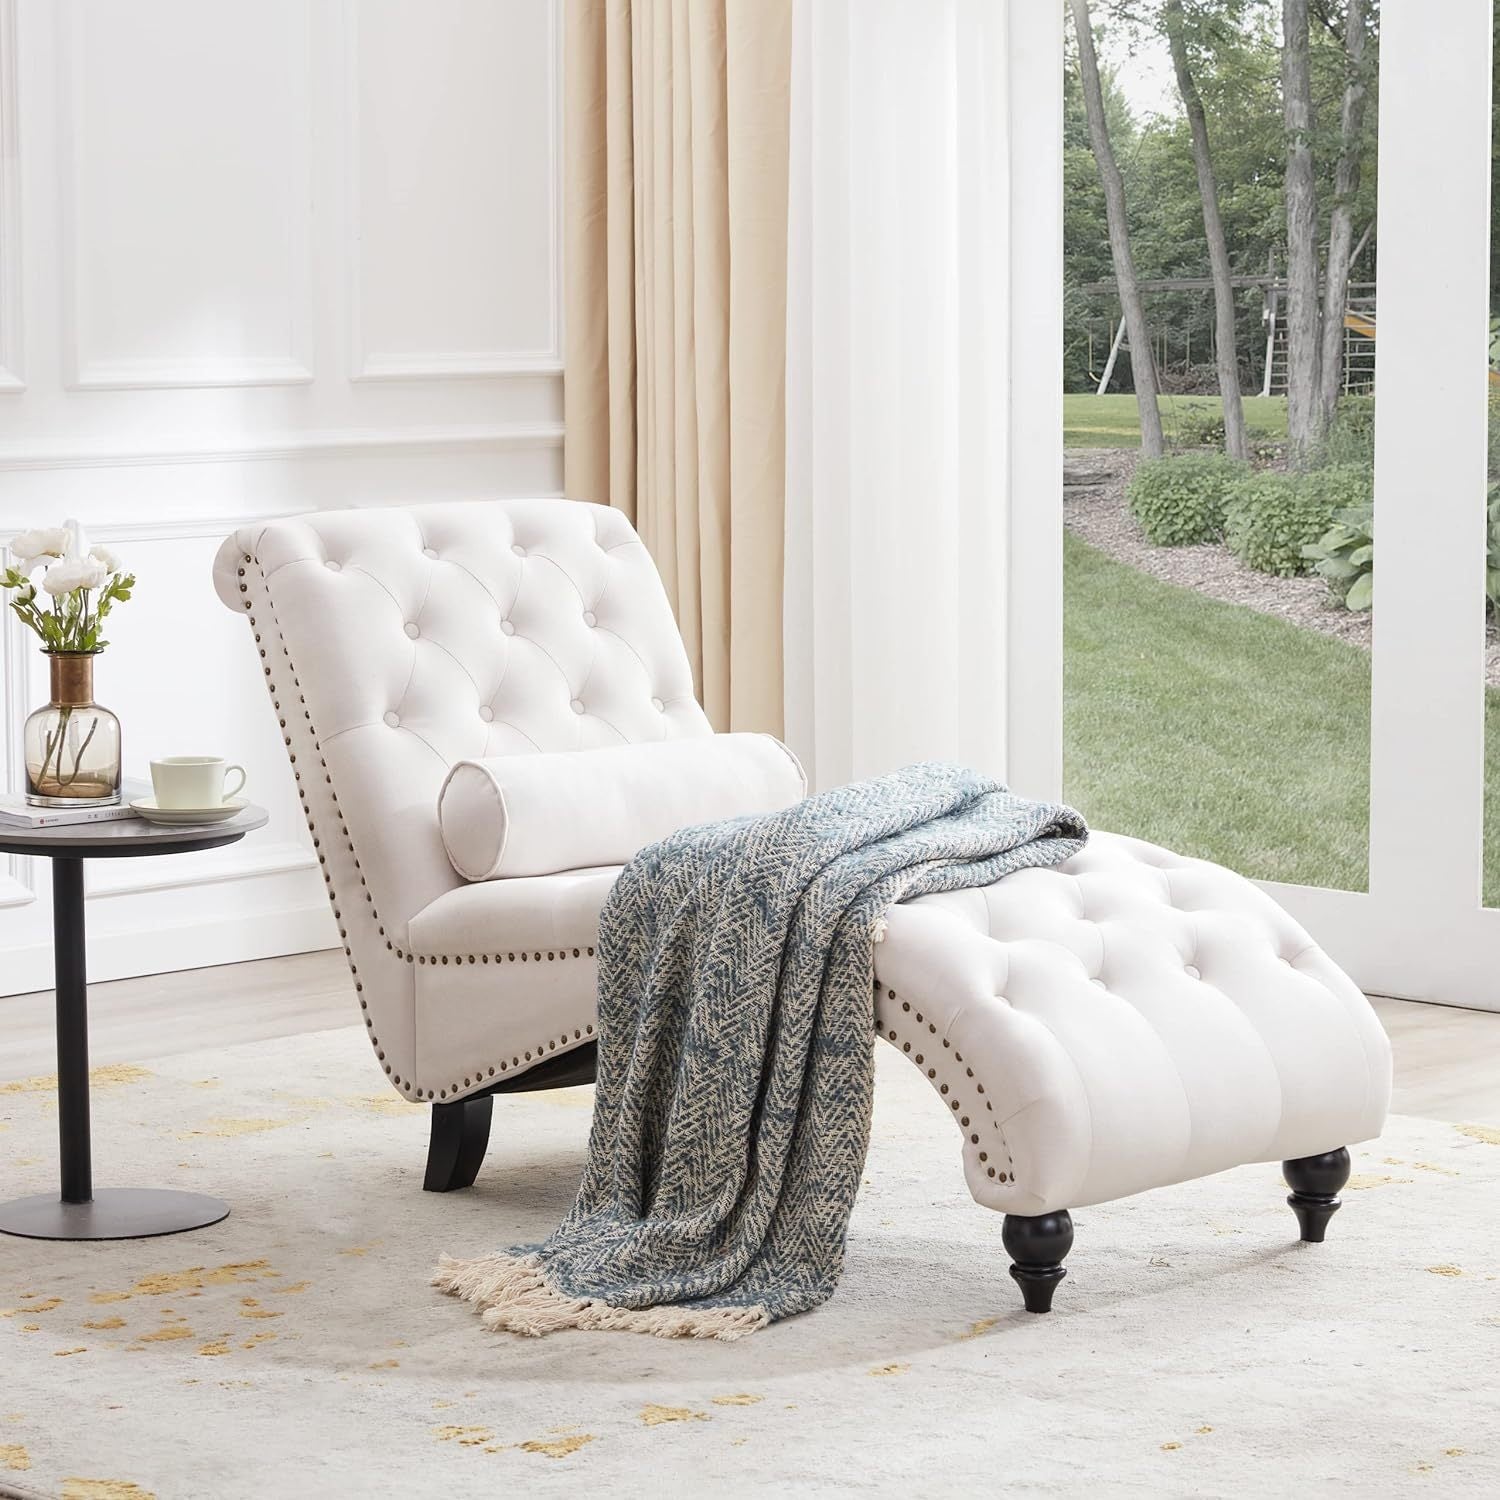 Upholstered Chaise Lounge With Solid Wood Legs -